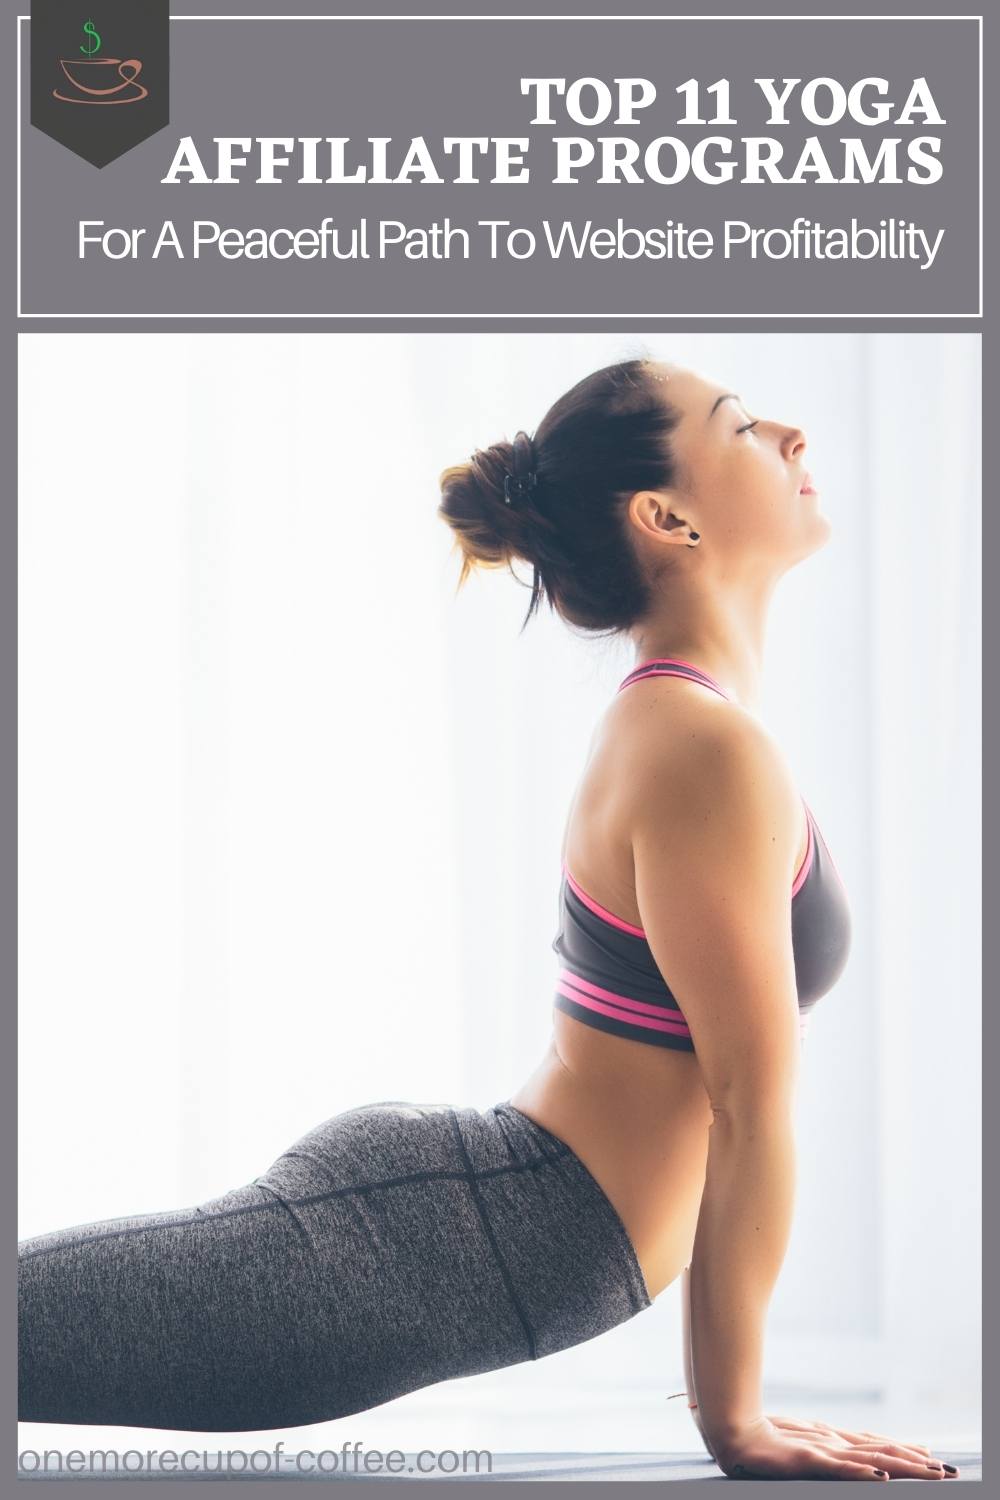 woman in grey sports bra with pink lining, and grey yoga pants, doing a yoga pose with text at the top in grey background 